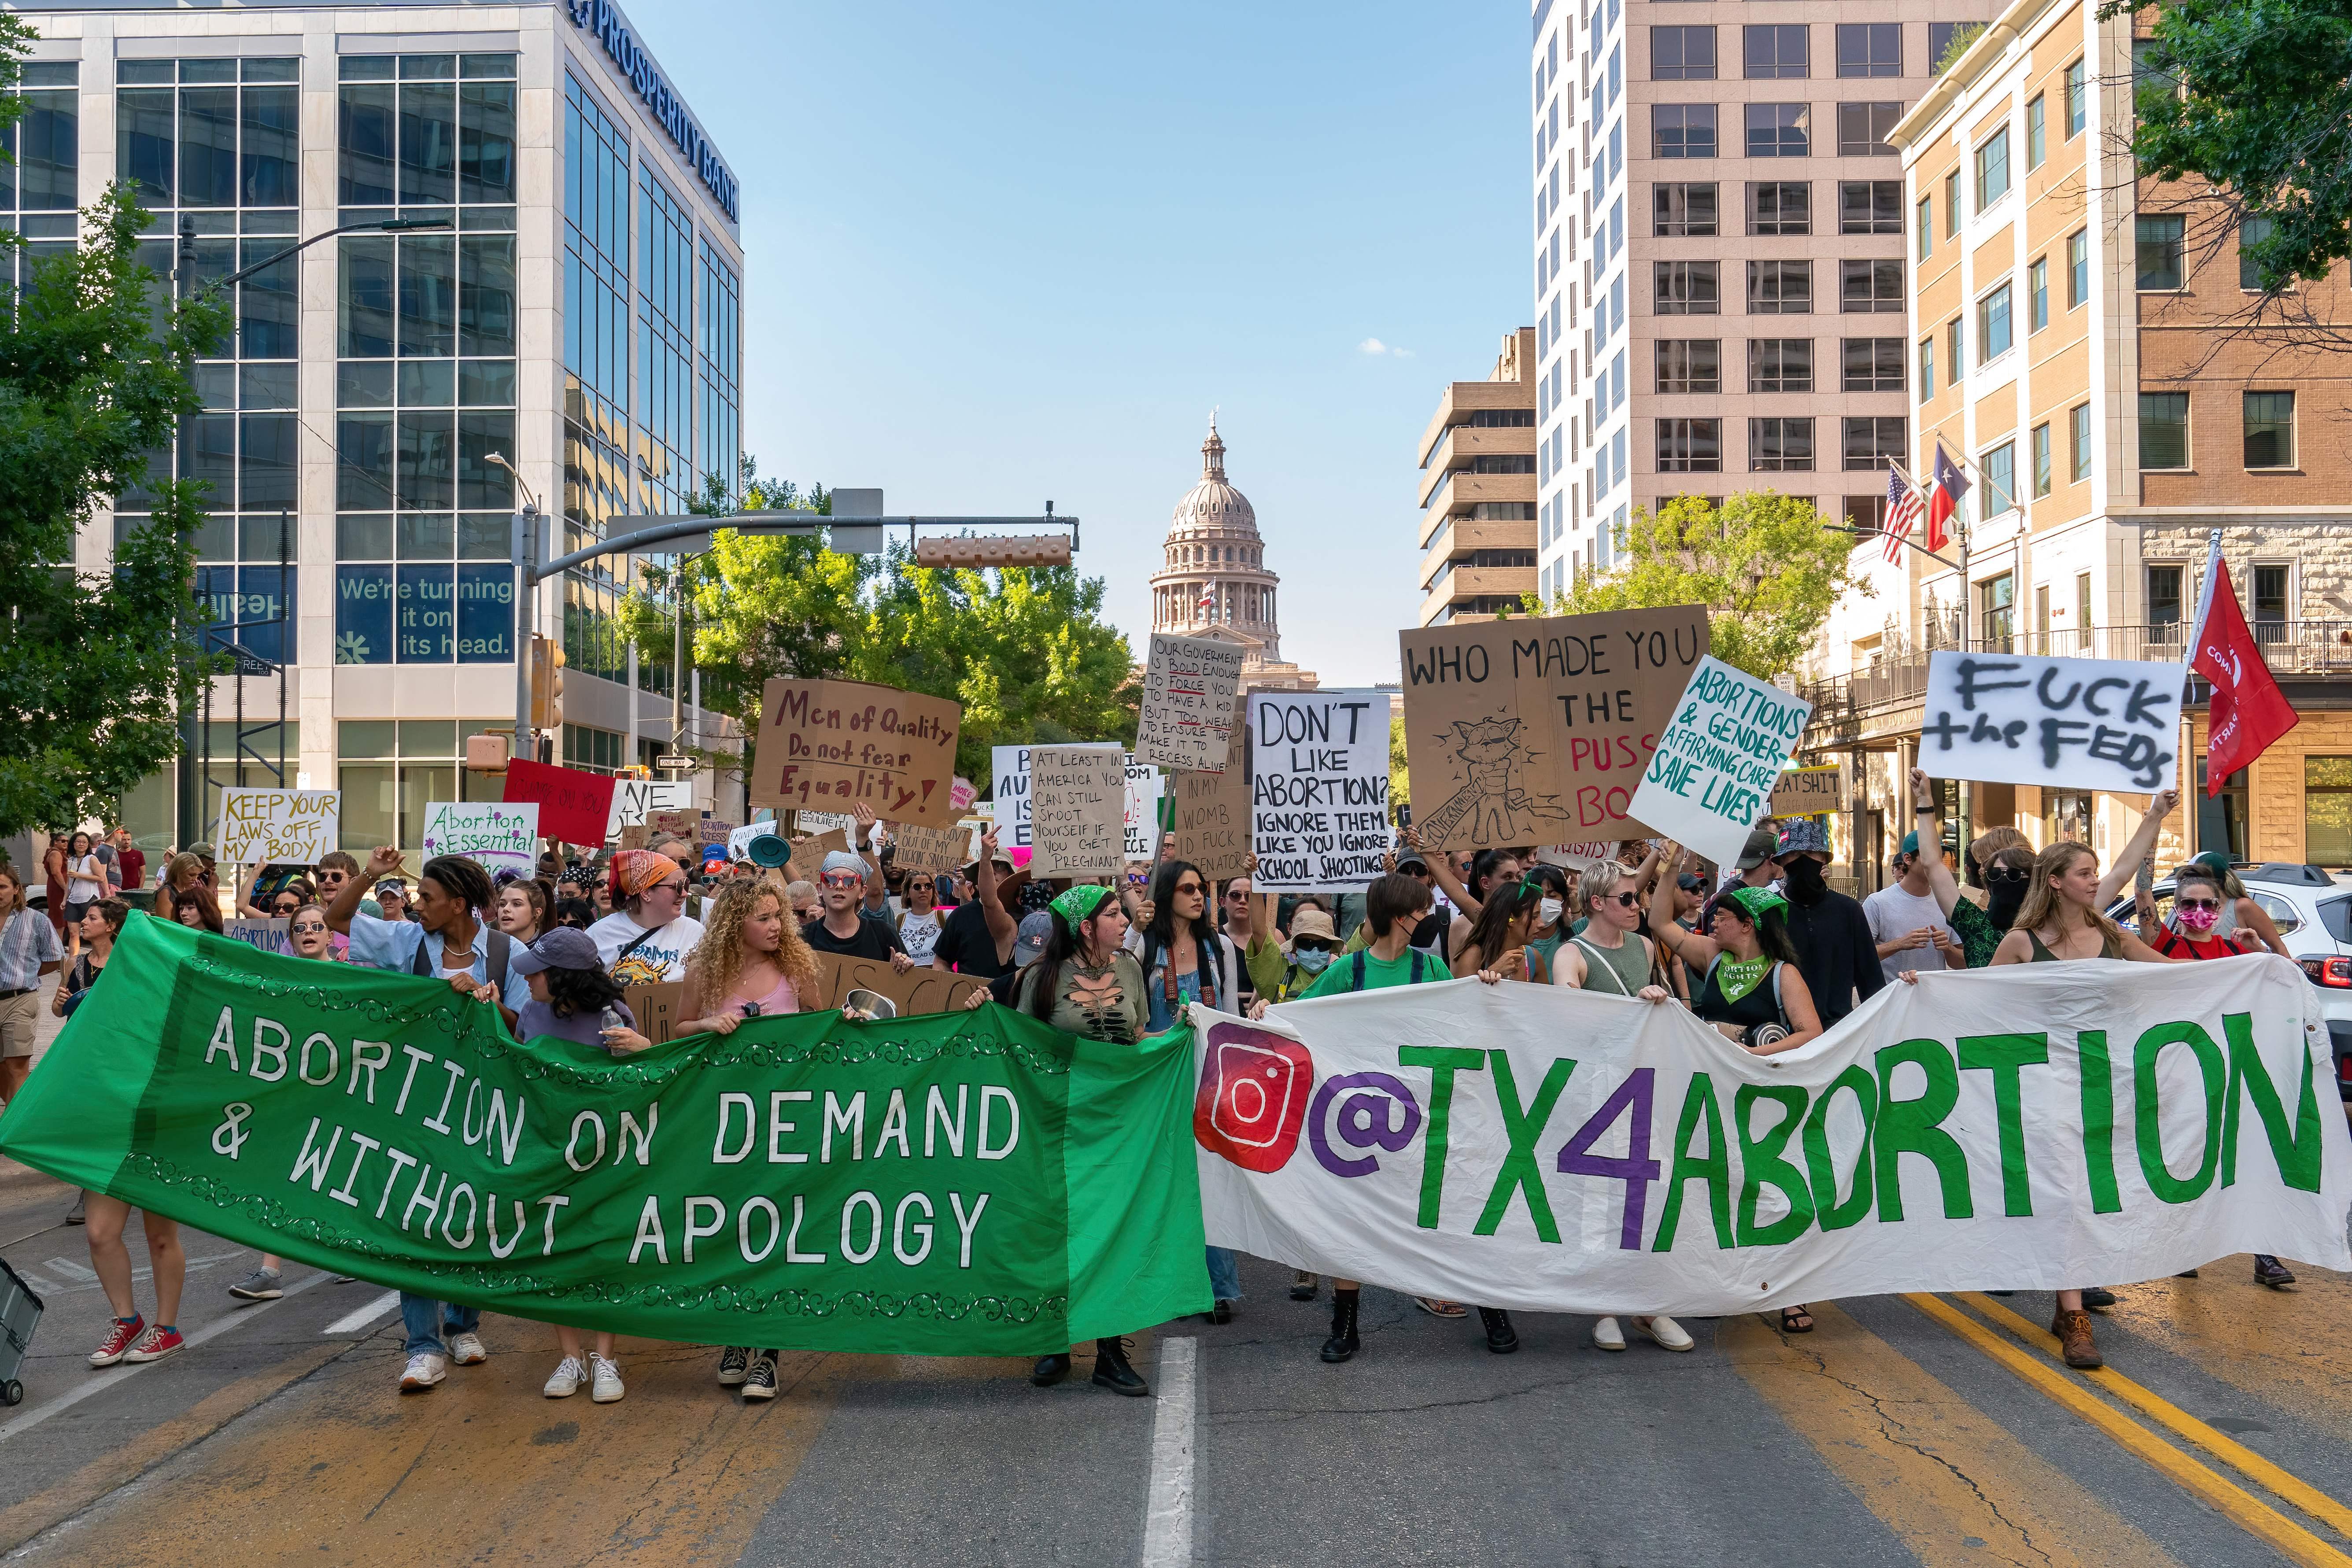 Abortion protesters fill the streets of Austin with signs like "Abortion on Demand & Without Apology."